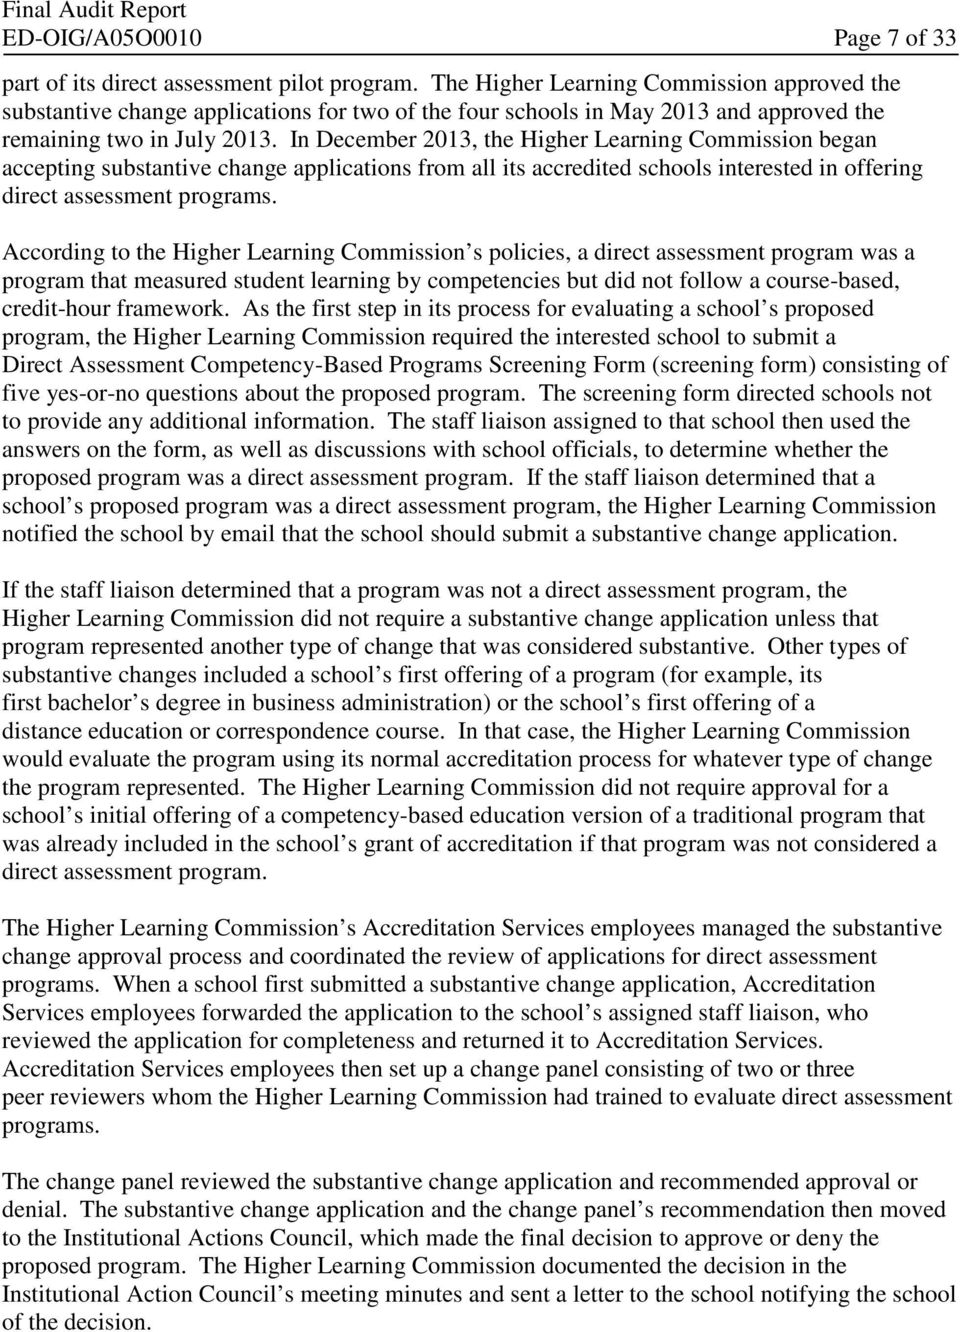 In December 2013, the Higher Learning Commission began accepting substantive change applications from all its accredited schools interested in offering direct assessment programs.